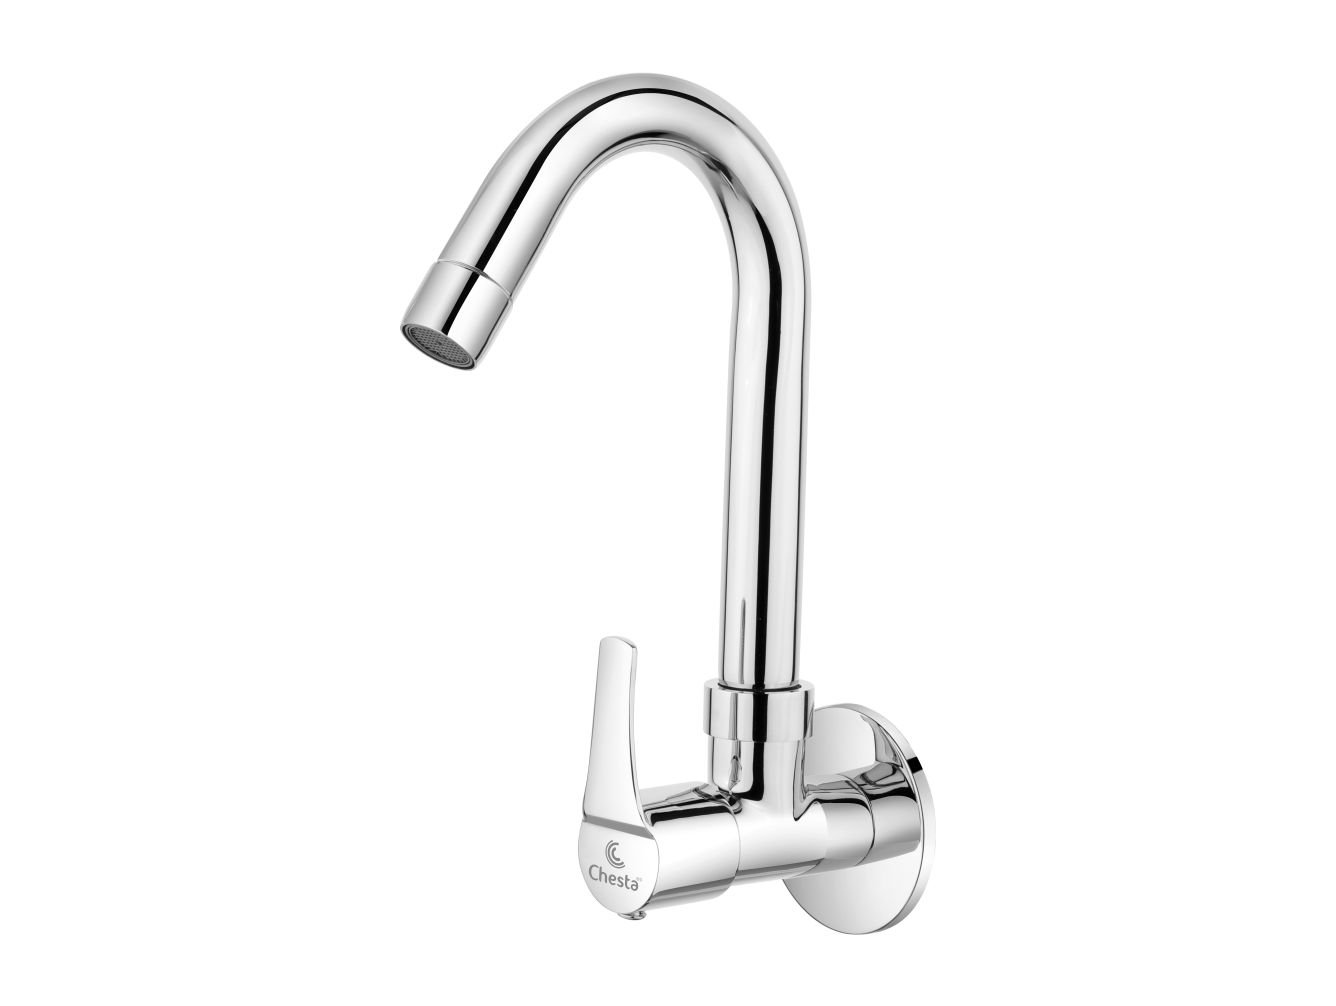 ST - 1007 - Sink Cock with Wall Flange at Chesta Bath Fittings